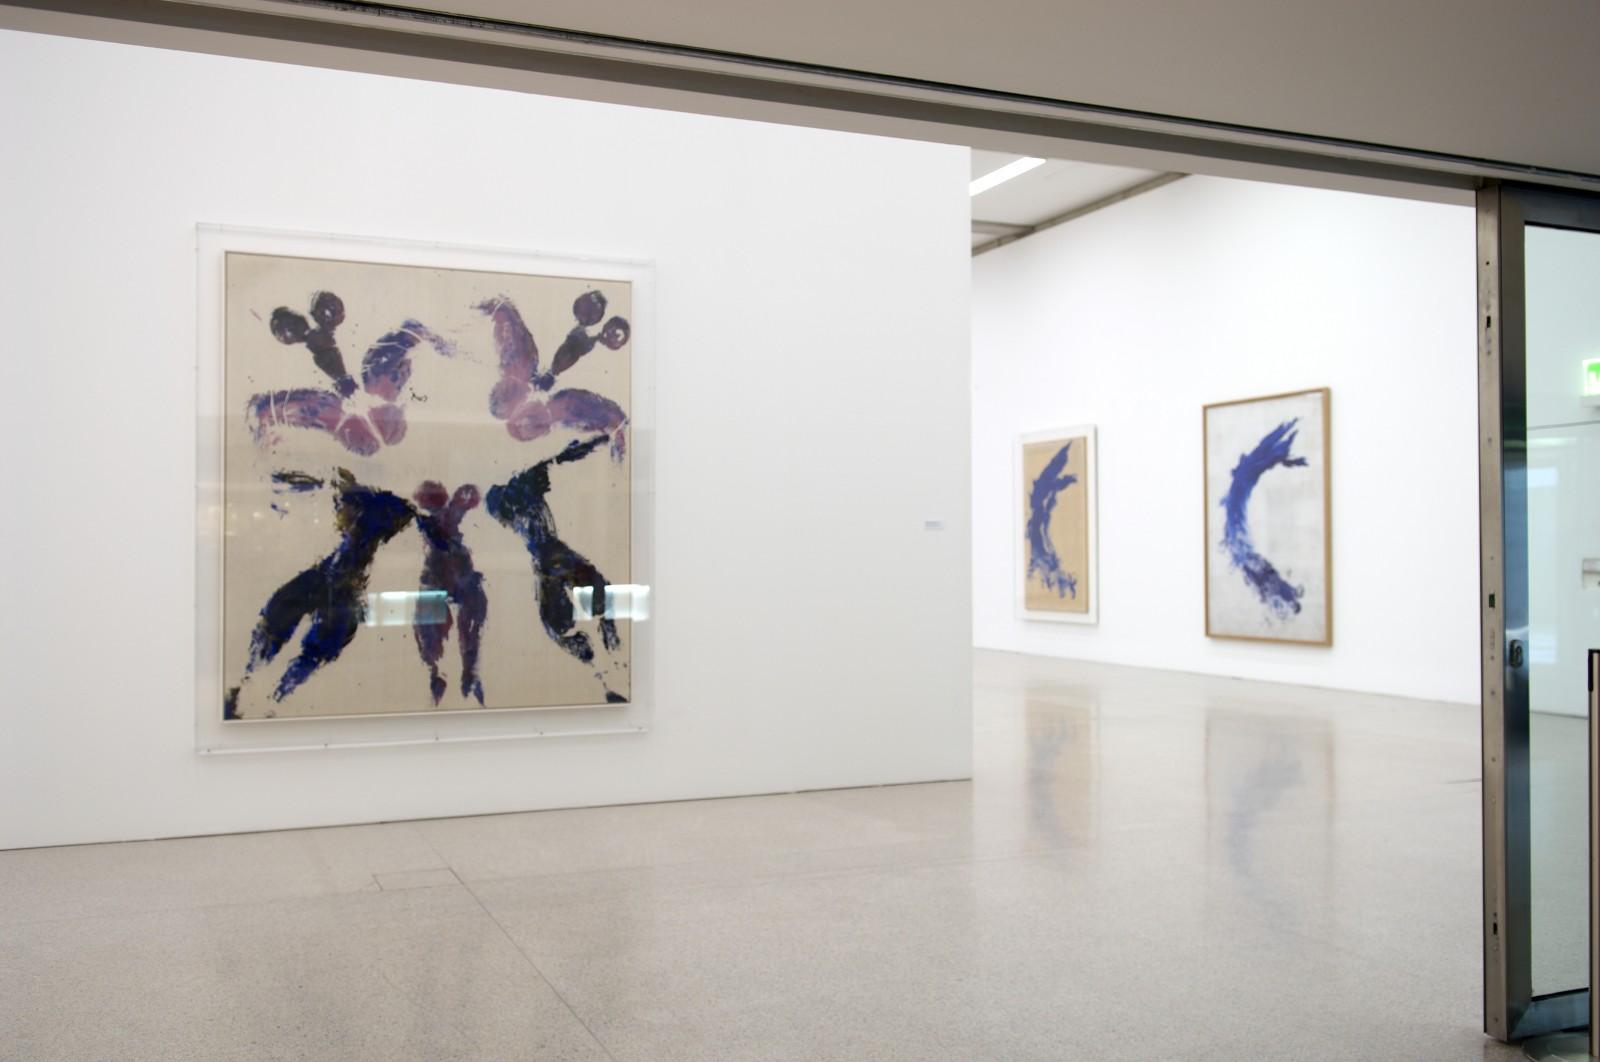 Vue de l'exposition, "Yves Klein Body, Colour and the Immaterial", mumok - Museum moderner Kunst Stiftung Ludwig Wien, 2007